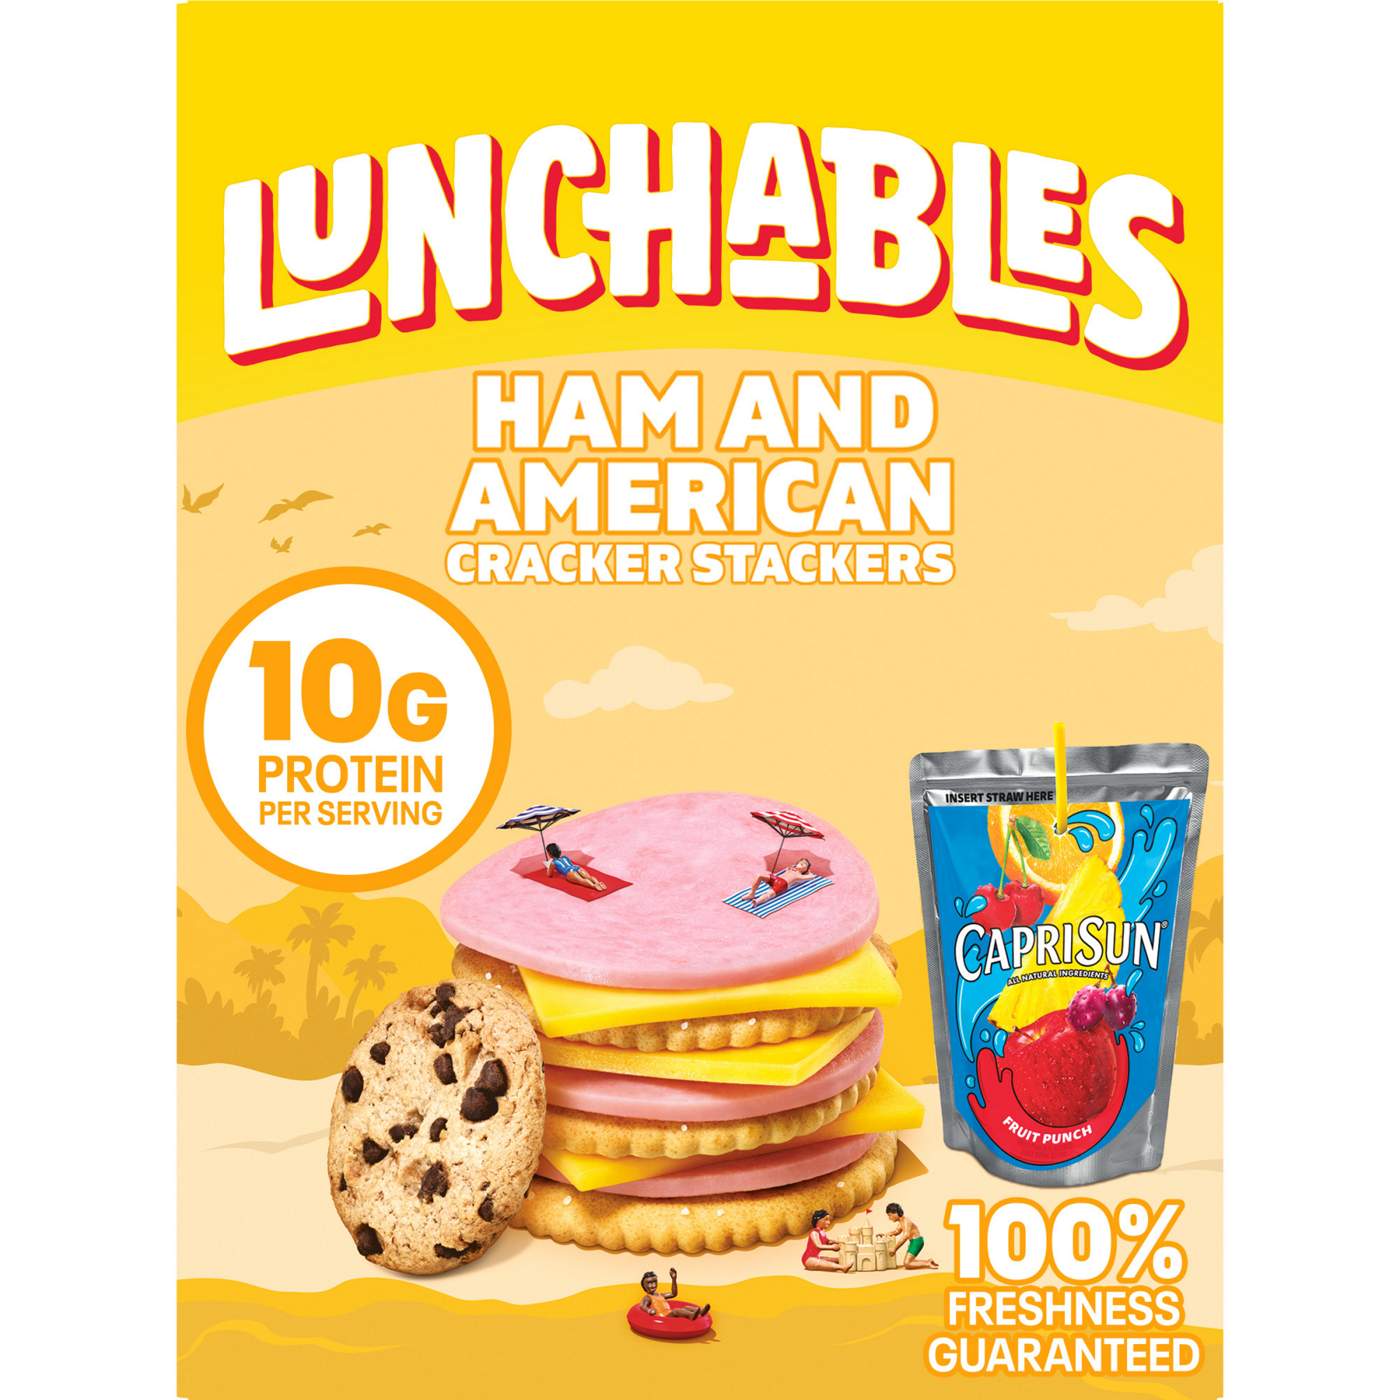 Lunchables Snack Kit Tray - Ham & American Cracker Stackers, Capri Sun & Cookie; image 1 of 6